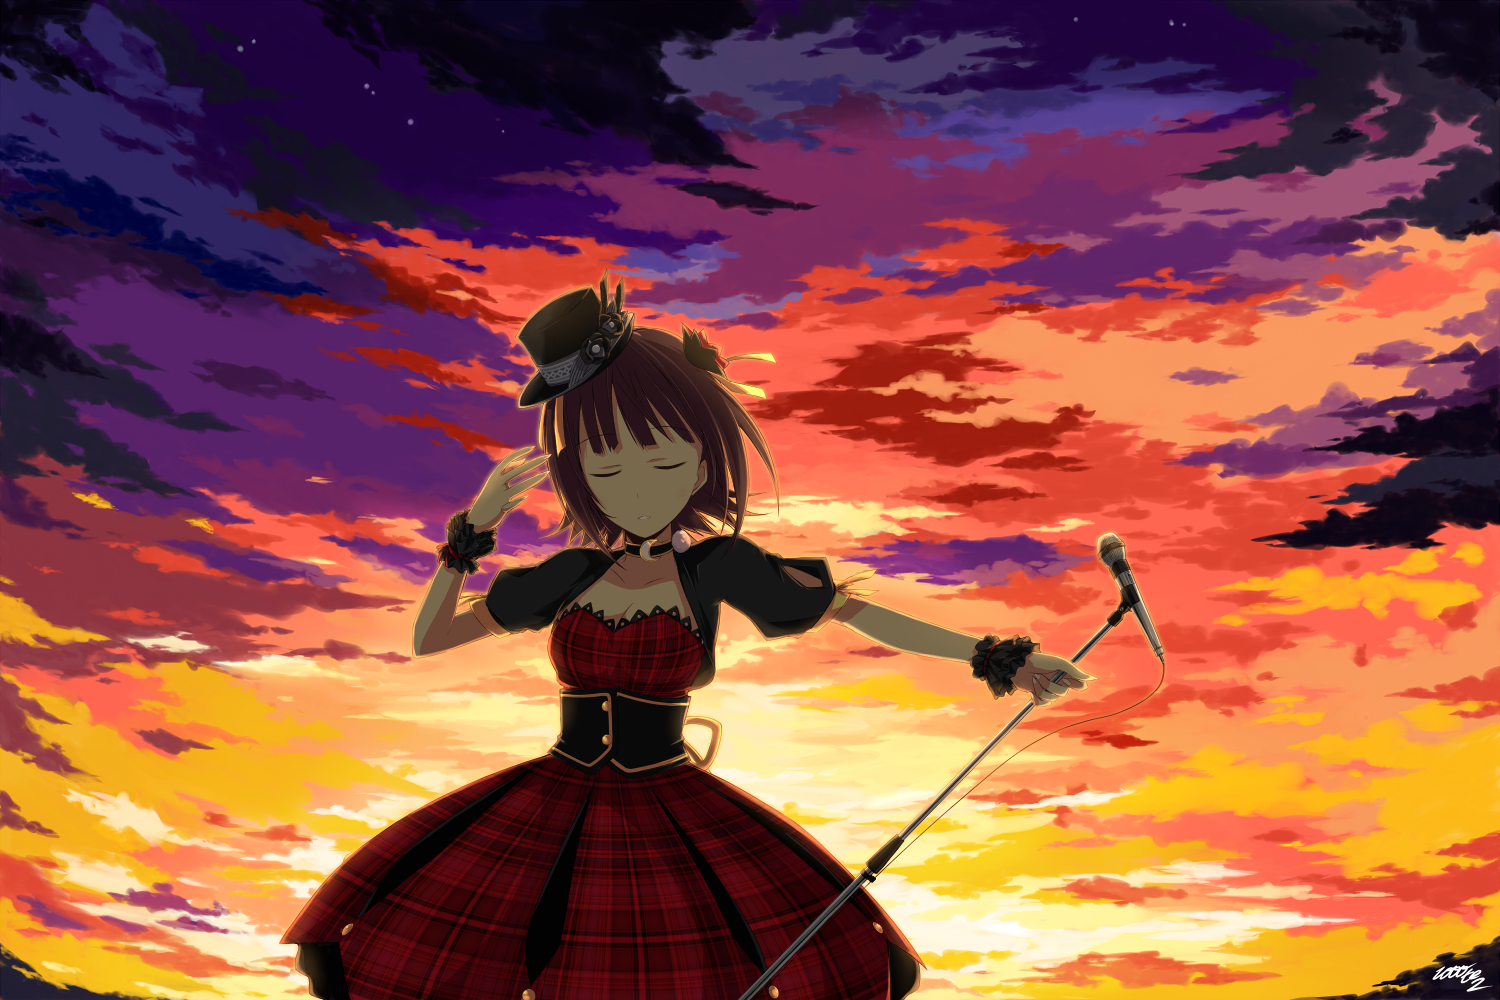 Anime 1500x1000 THE iDOLM@STER anime anime girls Amami Haruka funny hats hat women with hats microphone closed eyes sky clouds sunlight red dress standing